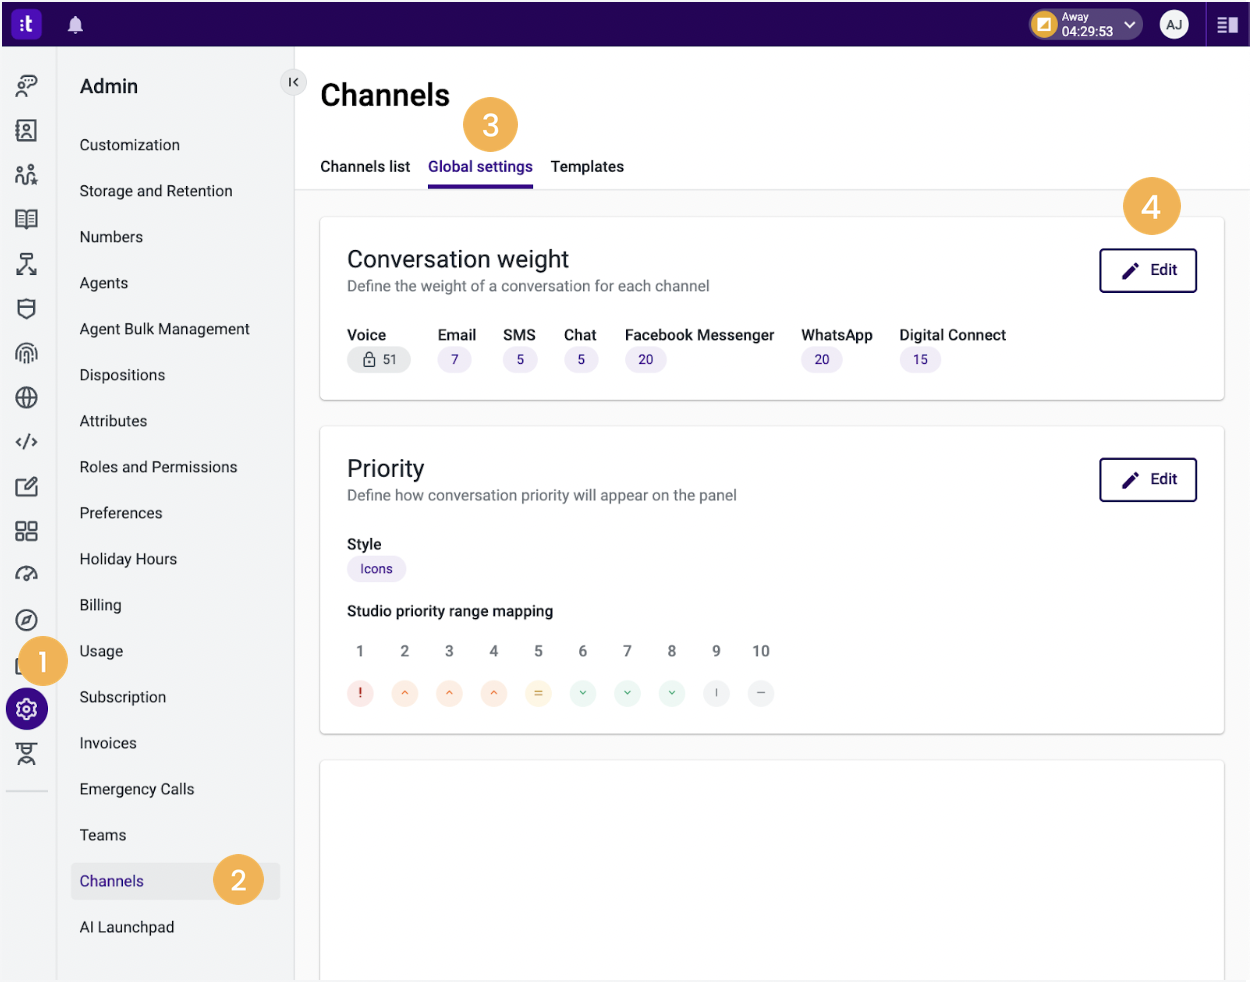 Talkdesk Digital Engagement: Cross-Channel Features for Administrators –  Knowledge Base